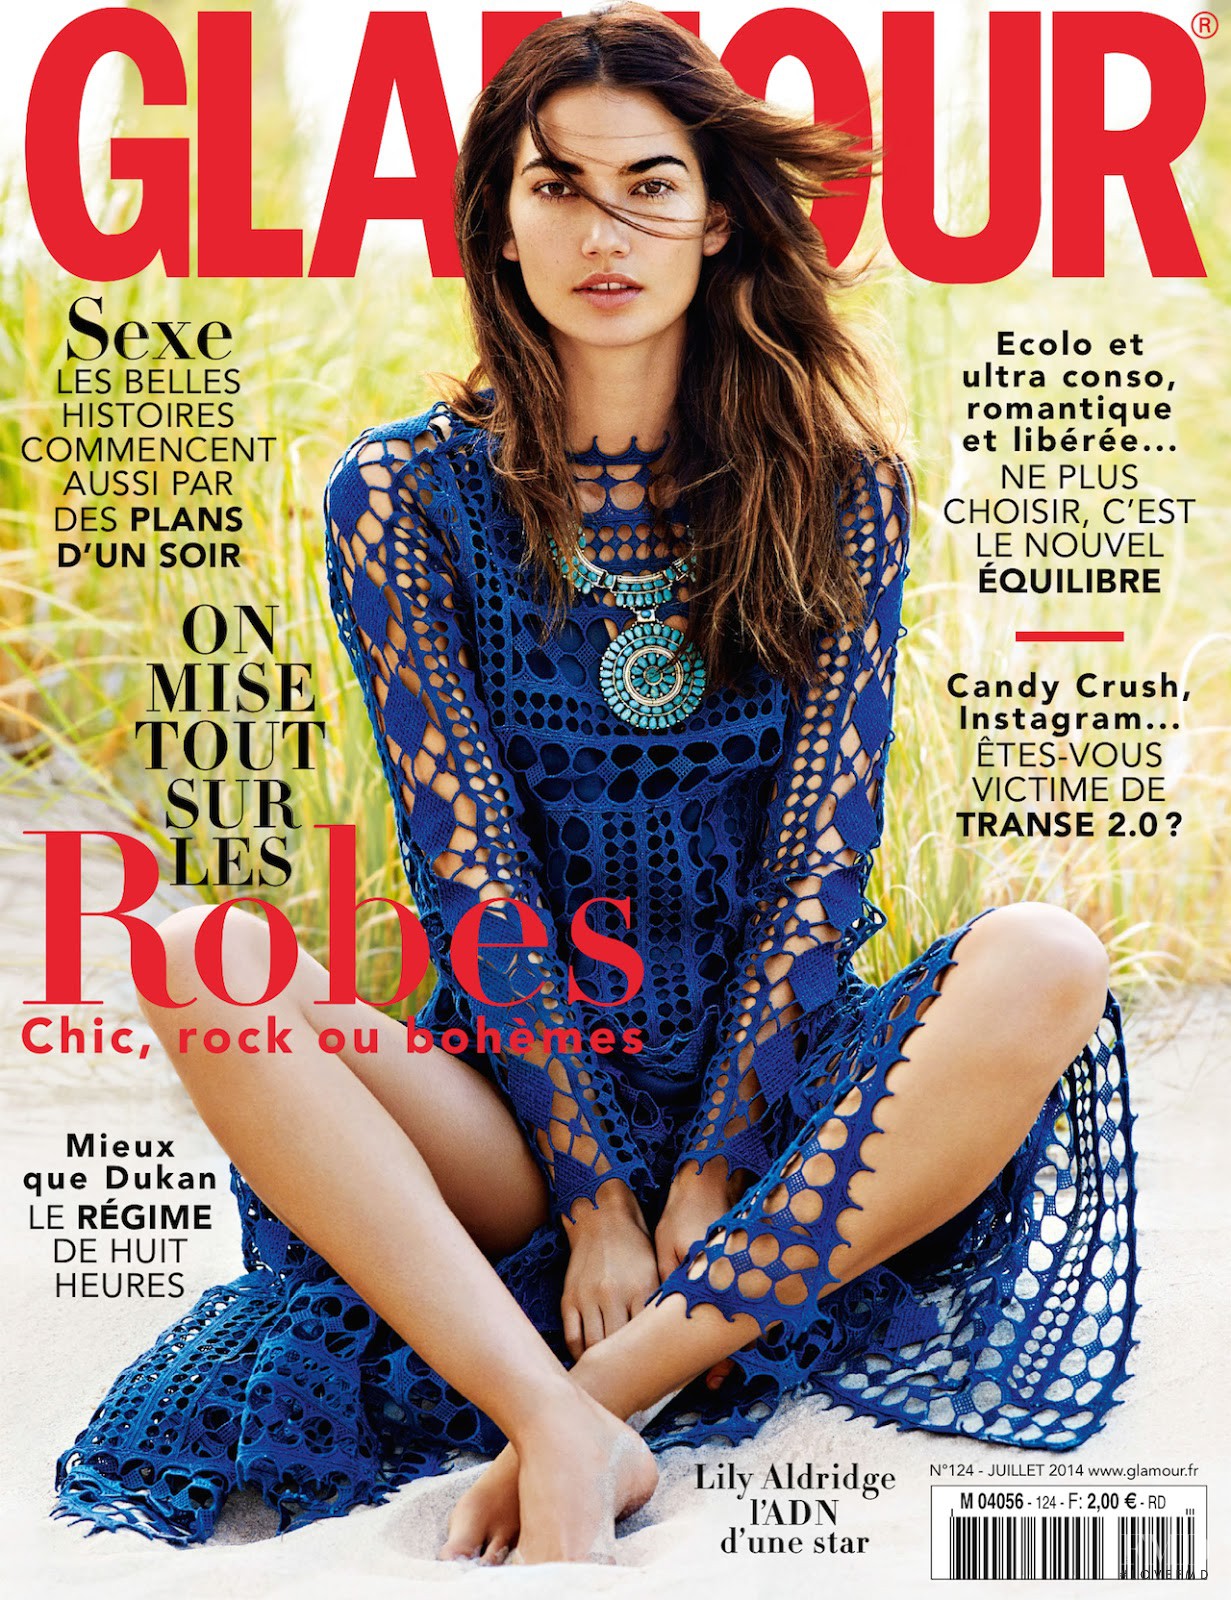 Cover of Glamour France with Lily Aldridge, July 2014 (ID:31076 ...